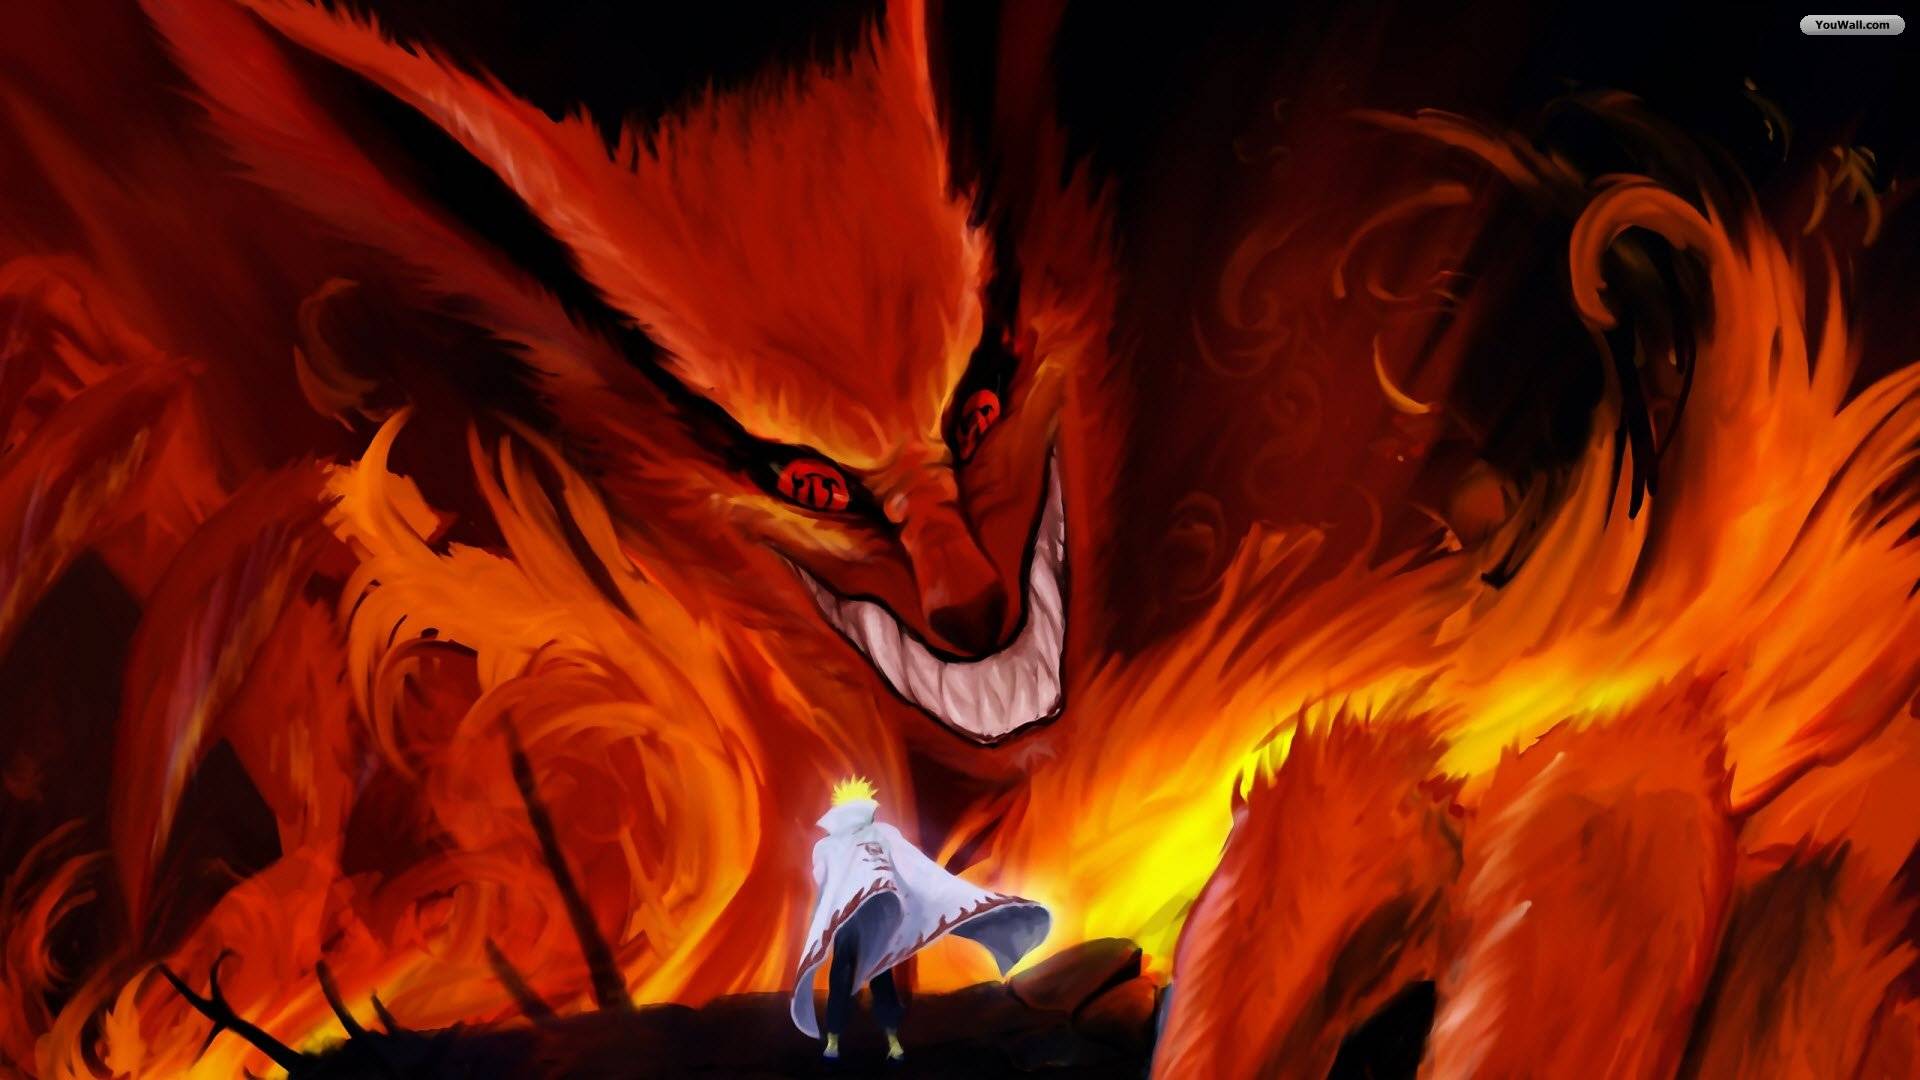 Wallpapers For > Naruto Shippuden Nine Tails Wallpapers Hd